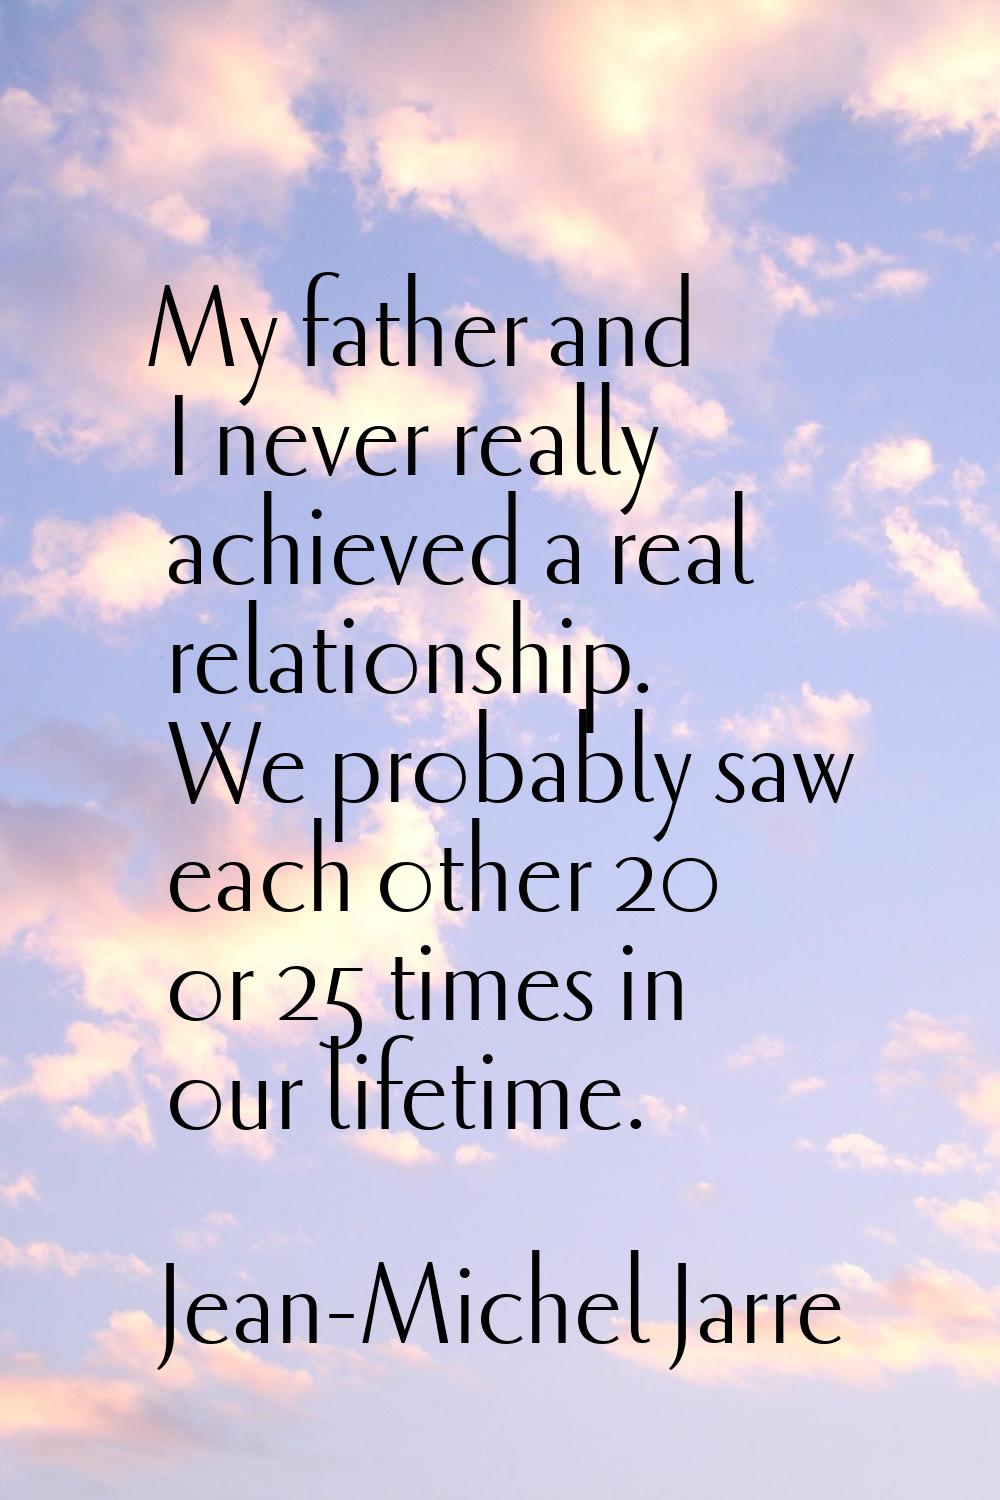 My father and I never really achieved a real relationship. We probably saw each other 20 or 25 time